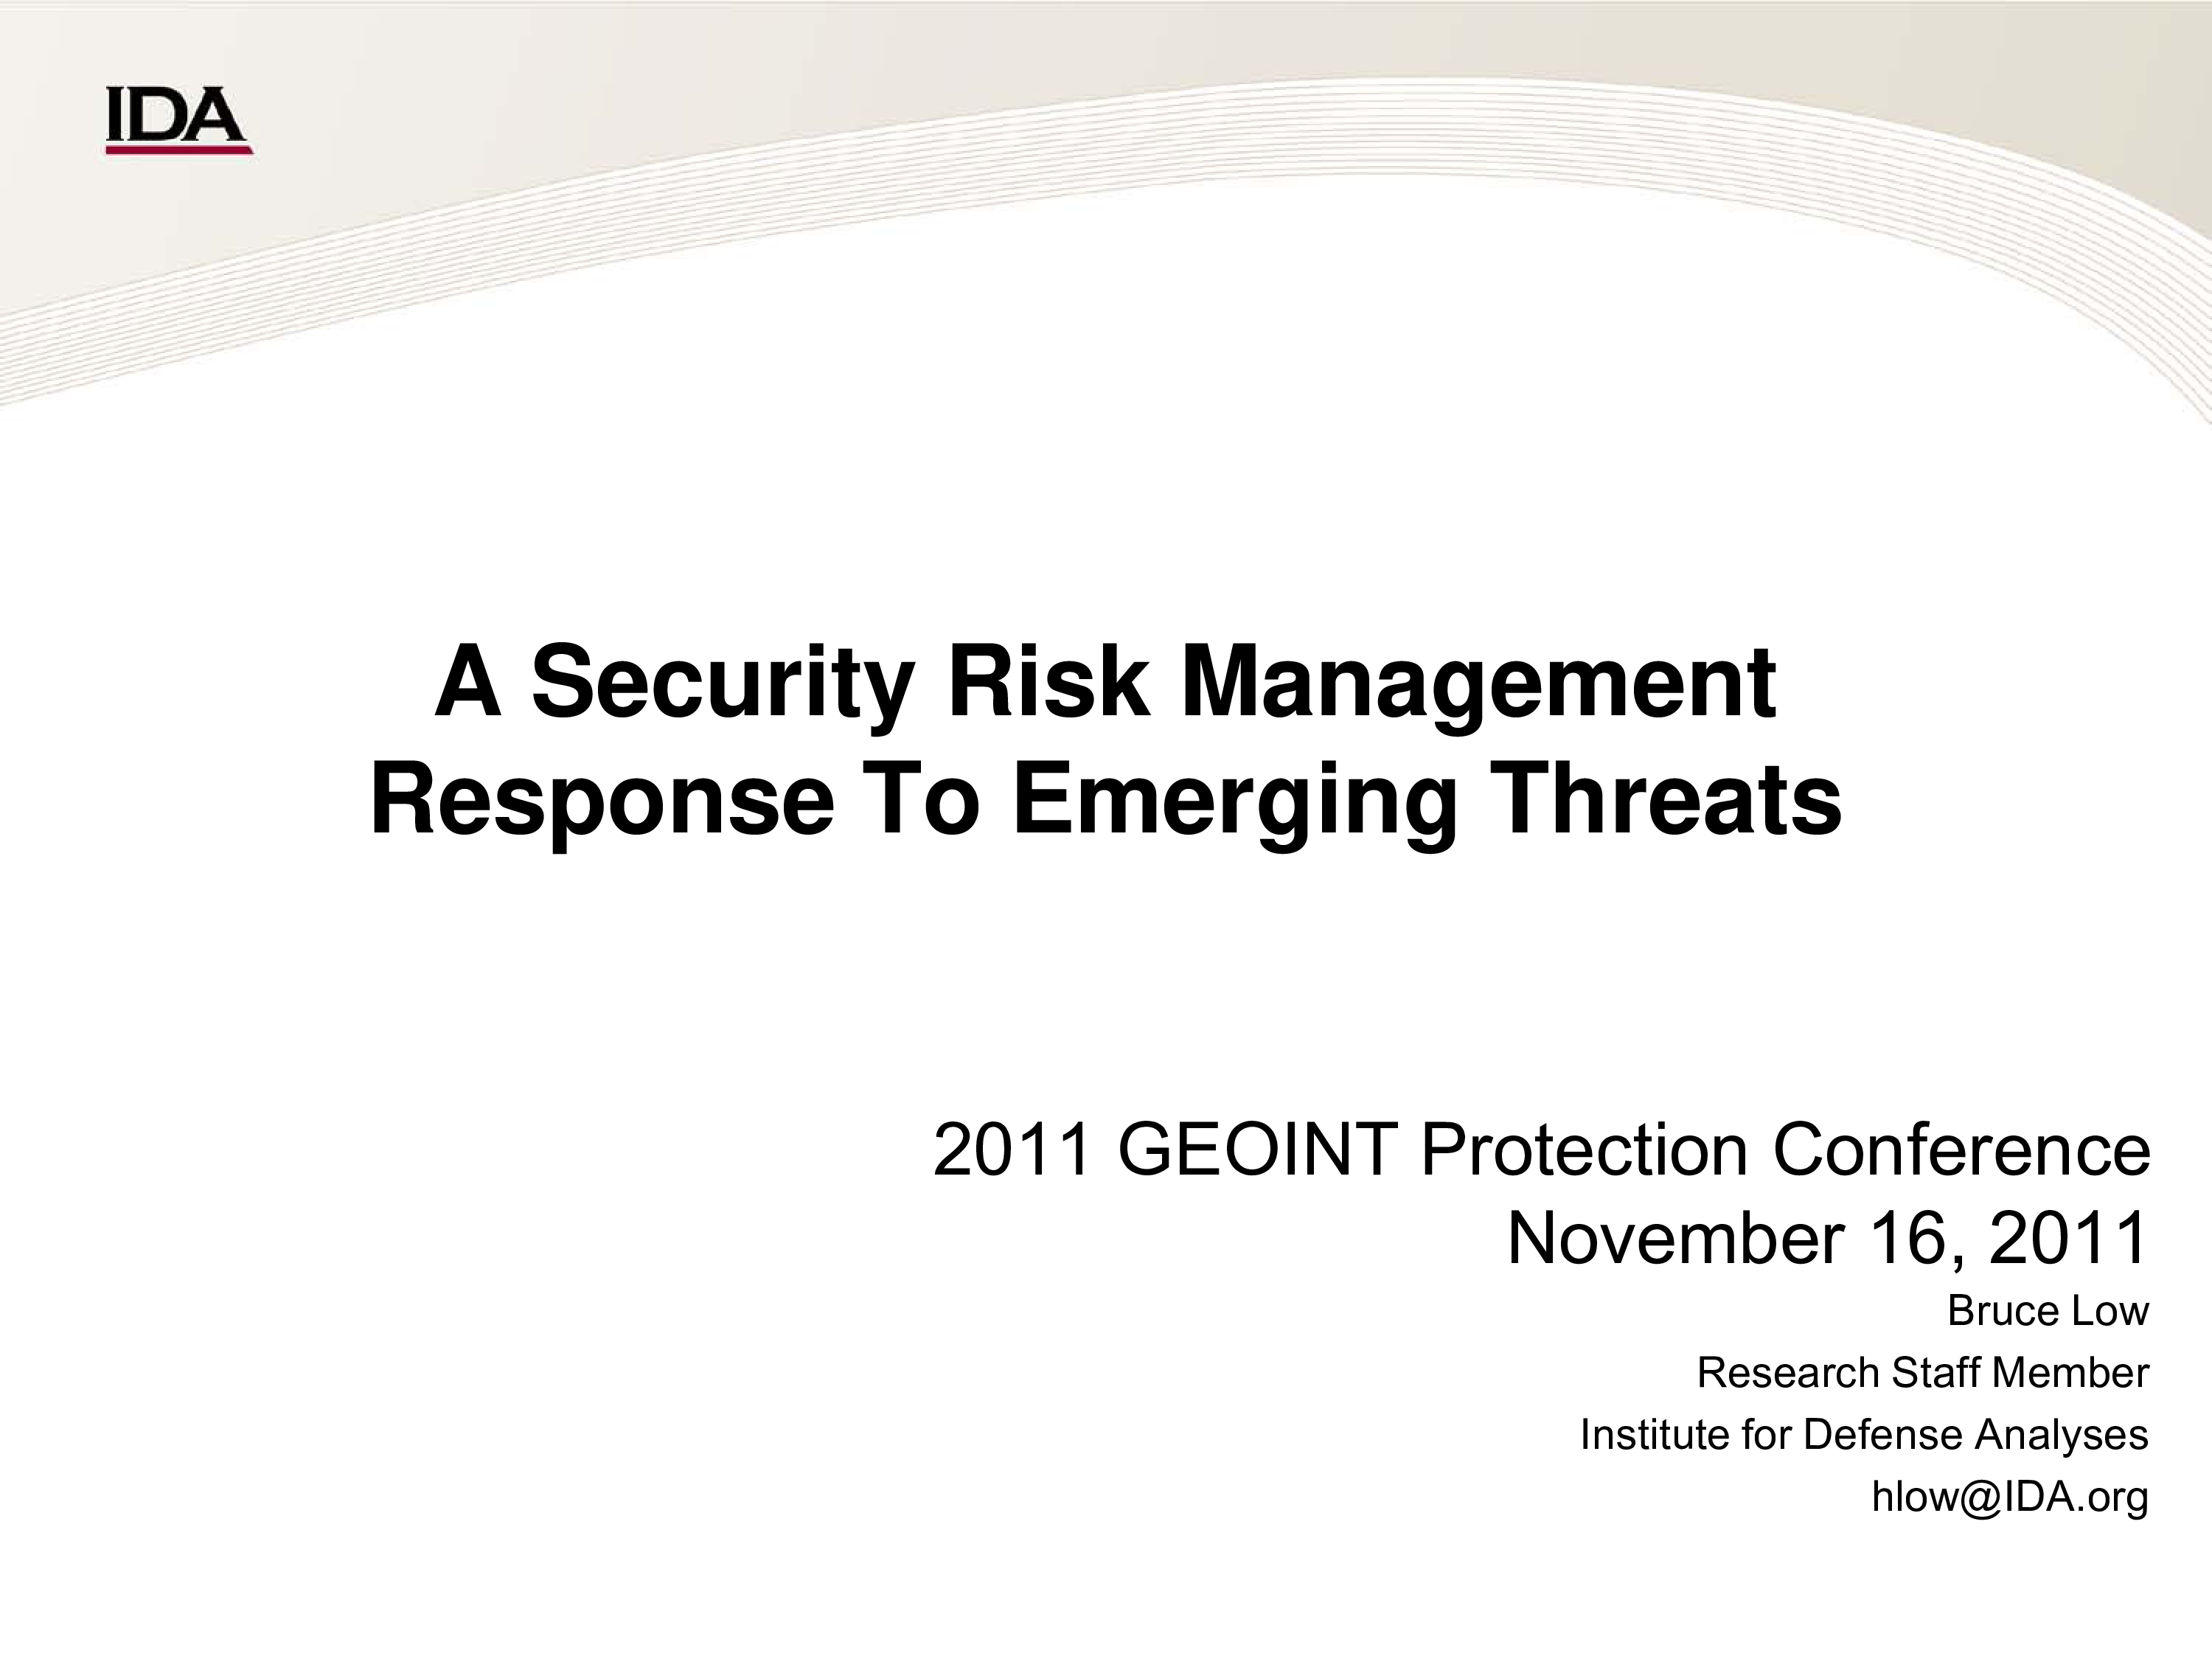 A Security Risk Management Response to Emerging Threats